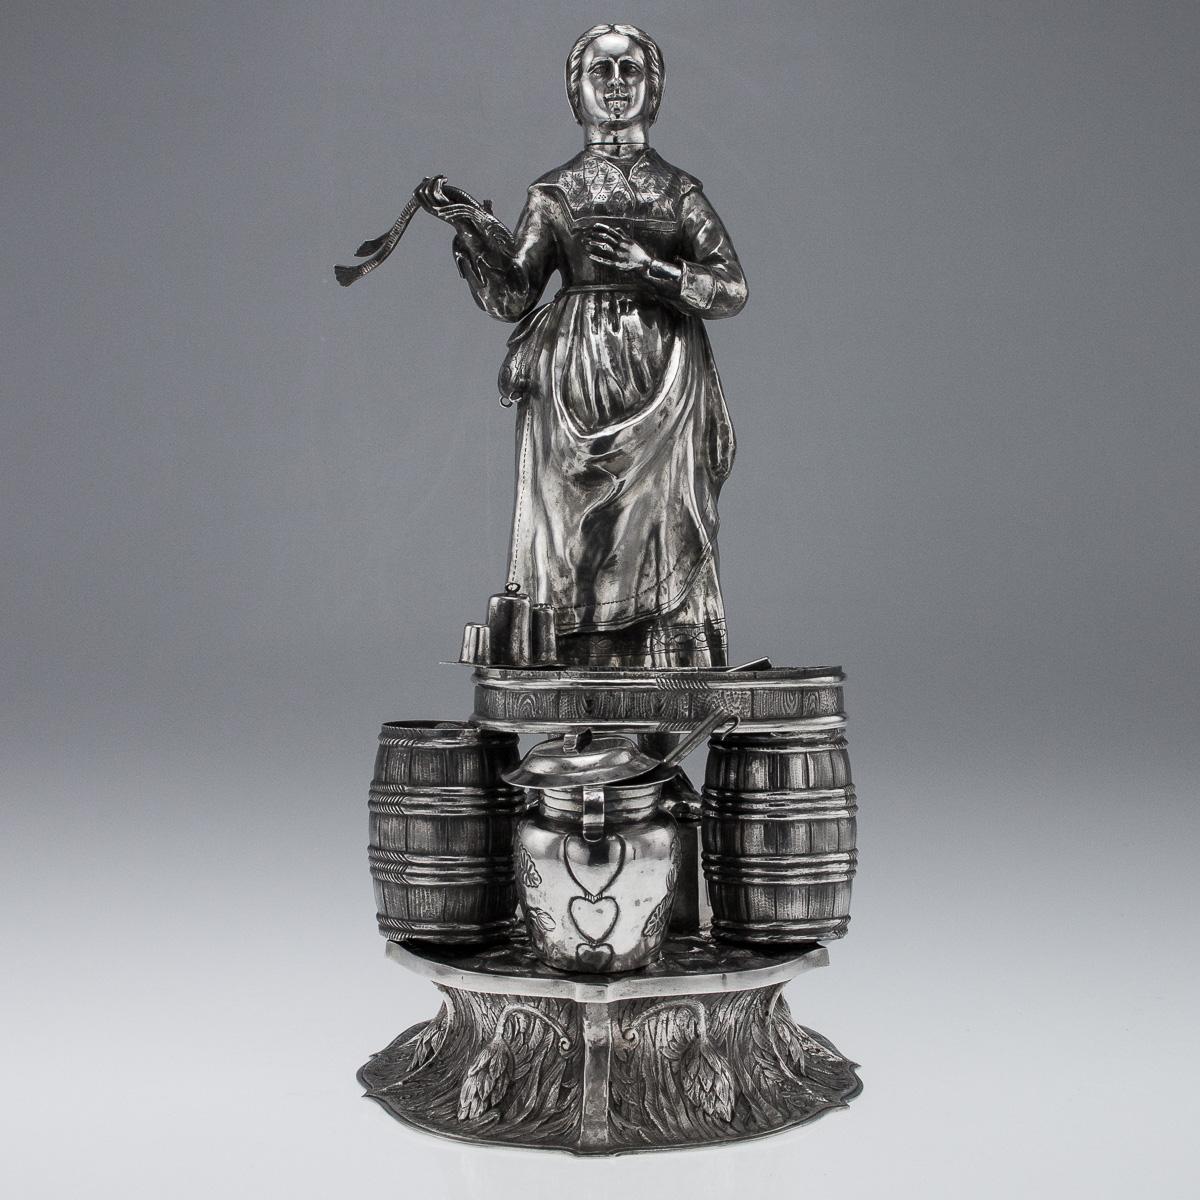 Antique 19th century German solid silver figural table ornament modelled as a female fishmonger, standing on a large shaped-oval base decorated with flowers, the large sculpture is very large and beautifully modelled, the right hand holding an eel,